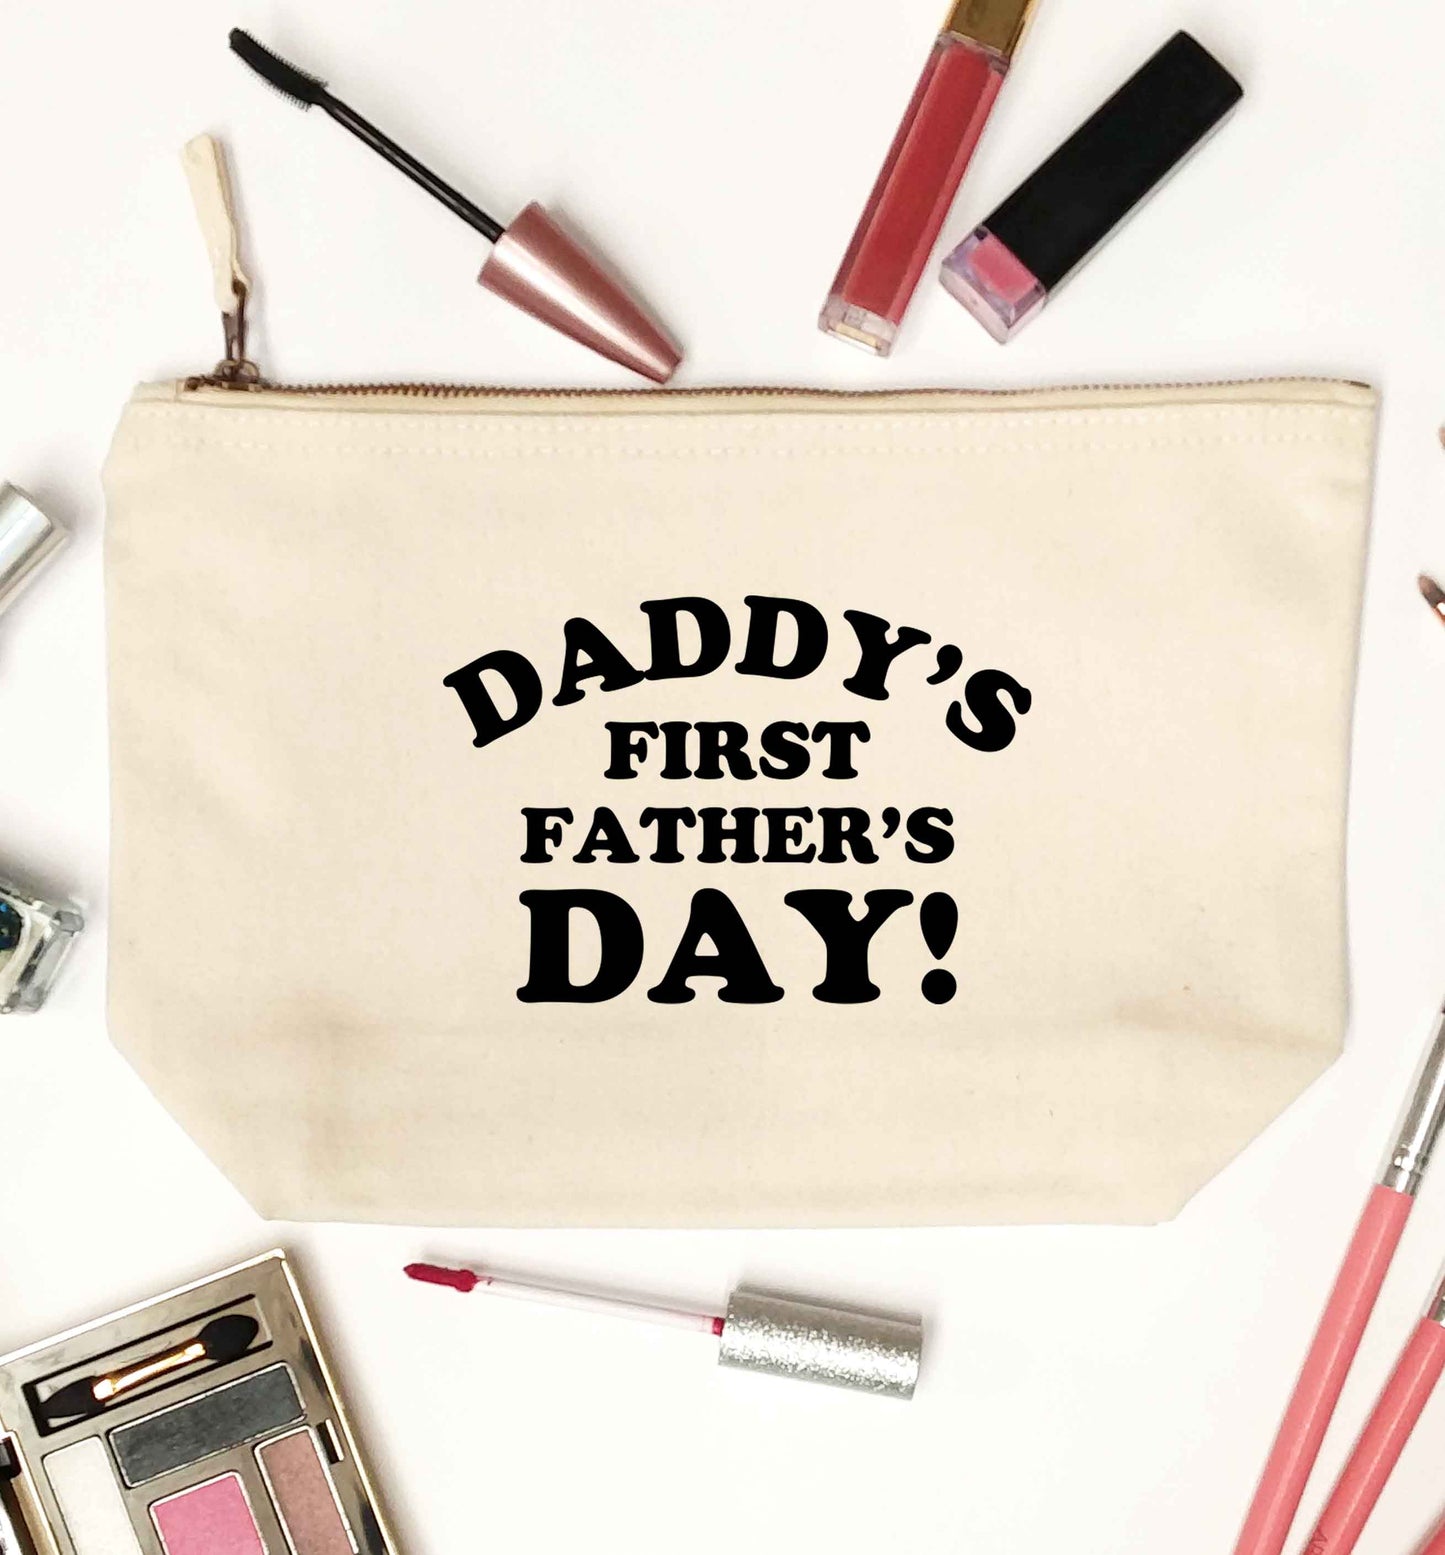 Daddy's first father's day natural makeup bag